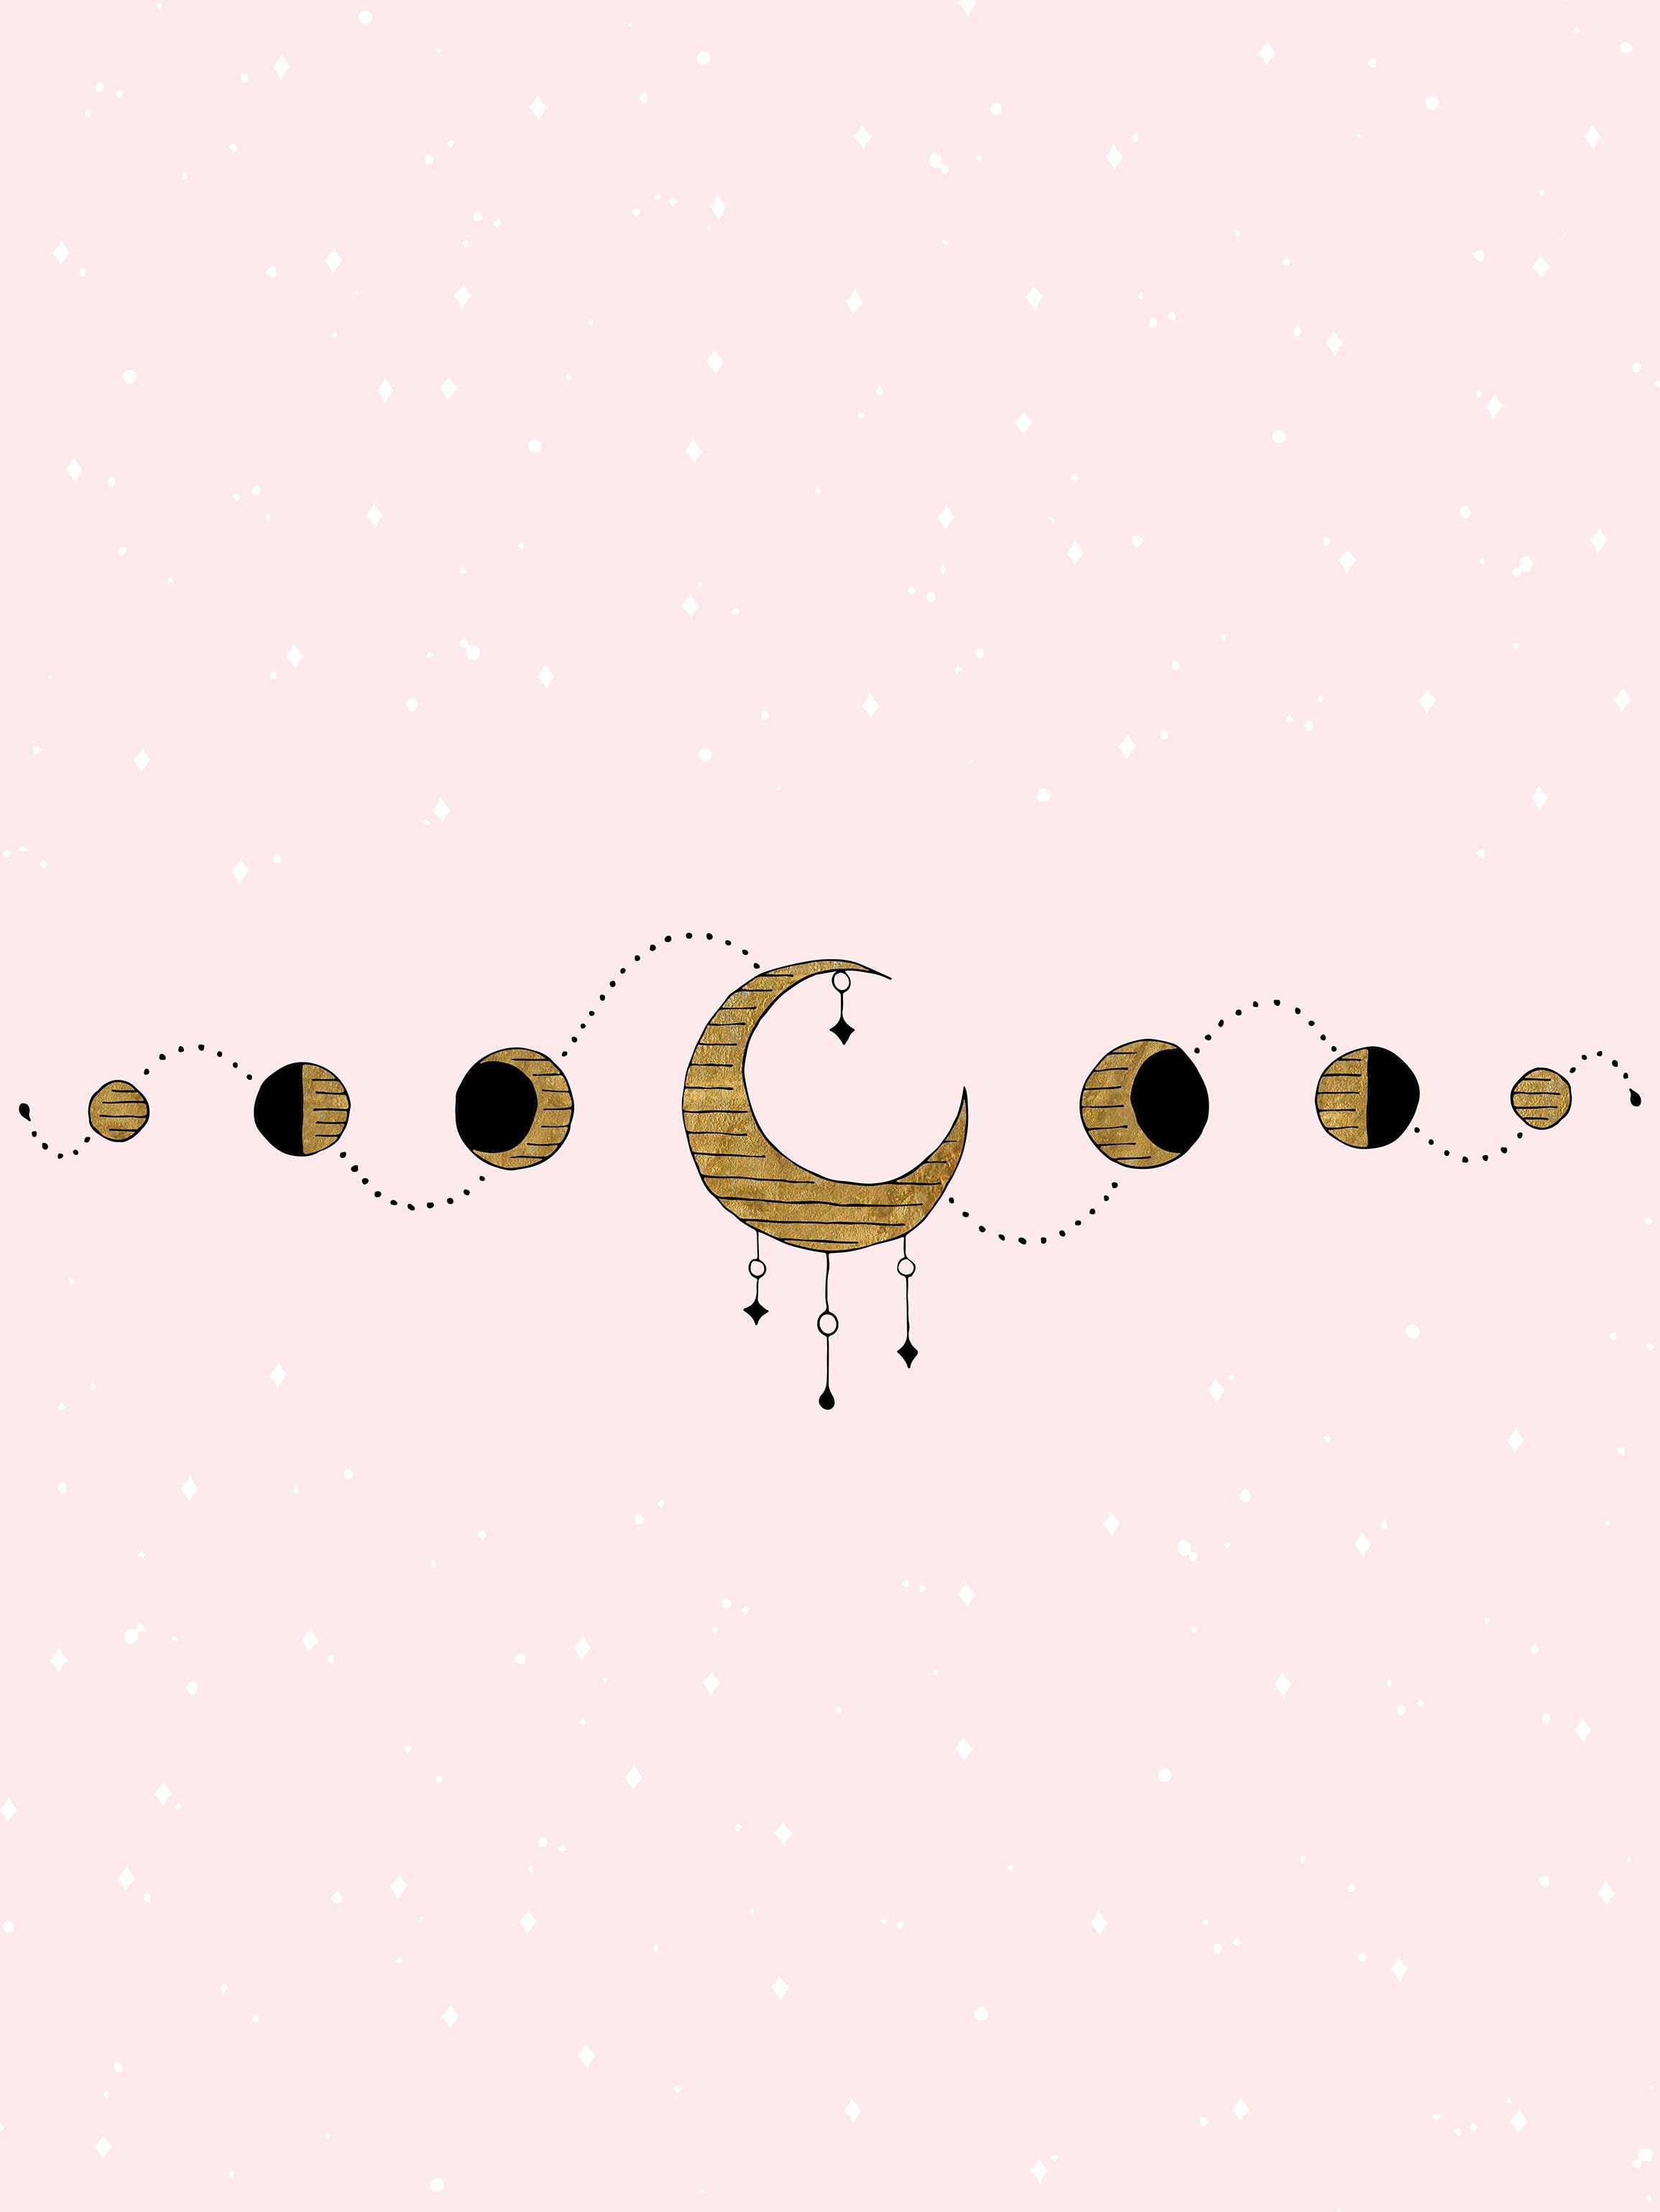 A moon phase tattoo design - Moon phases, moon